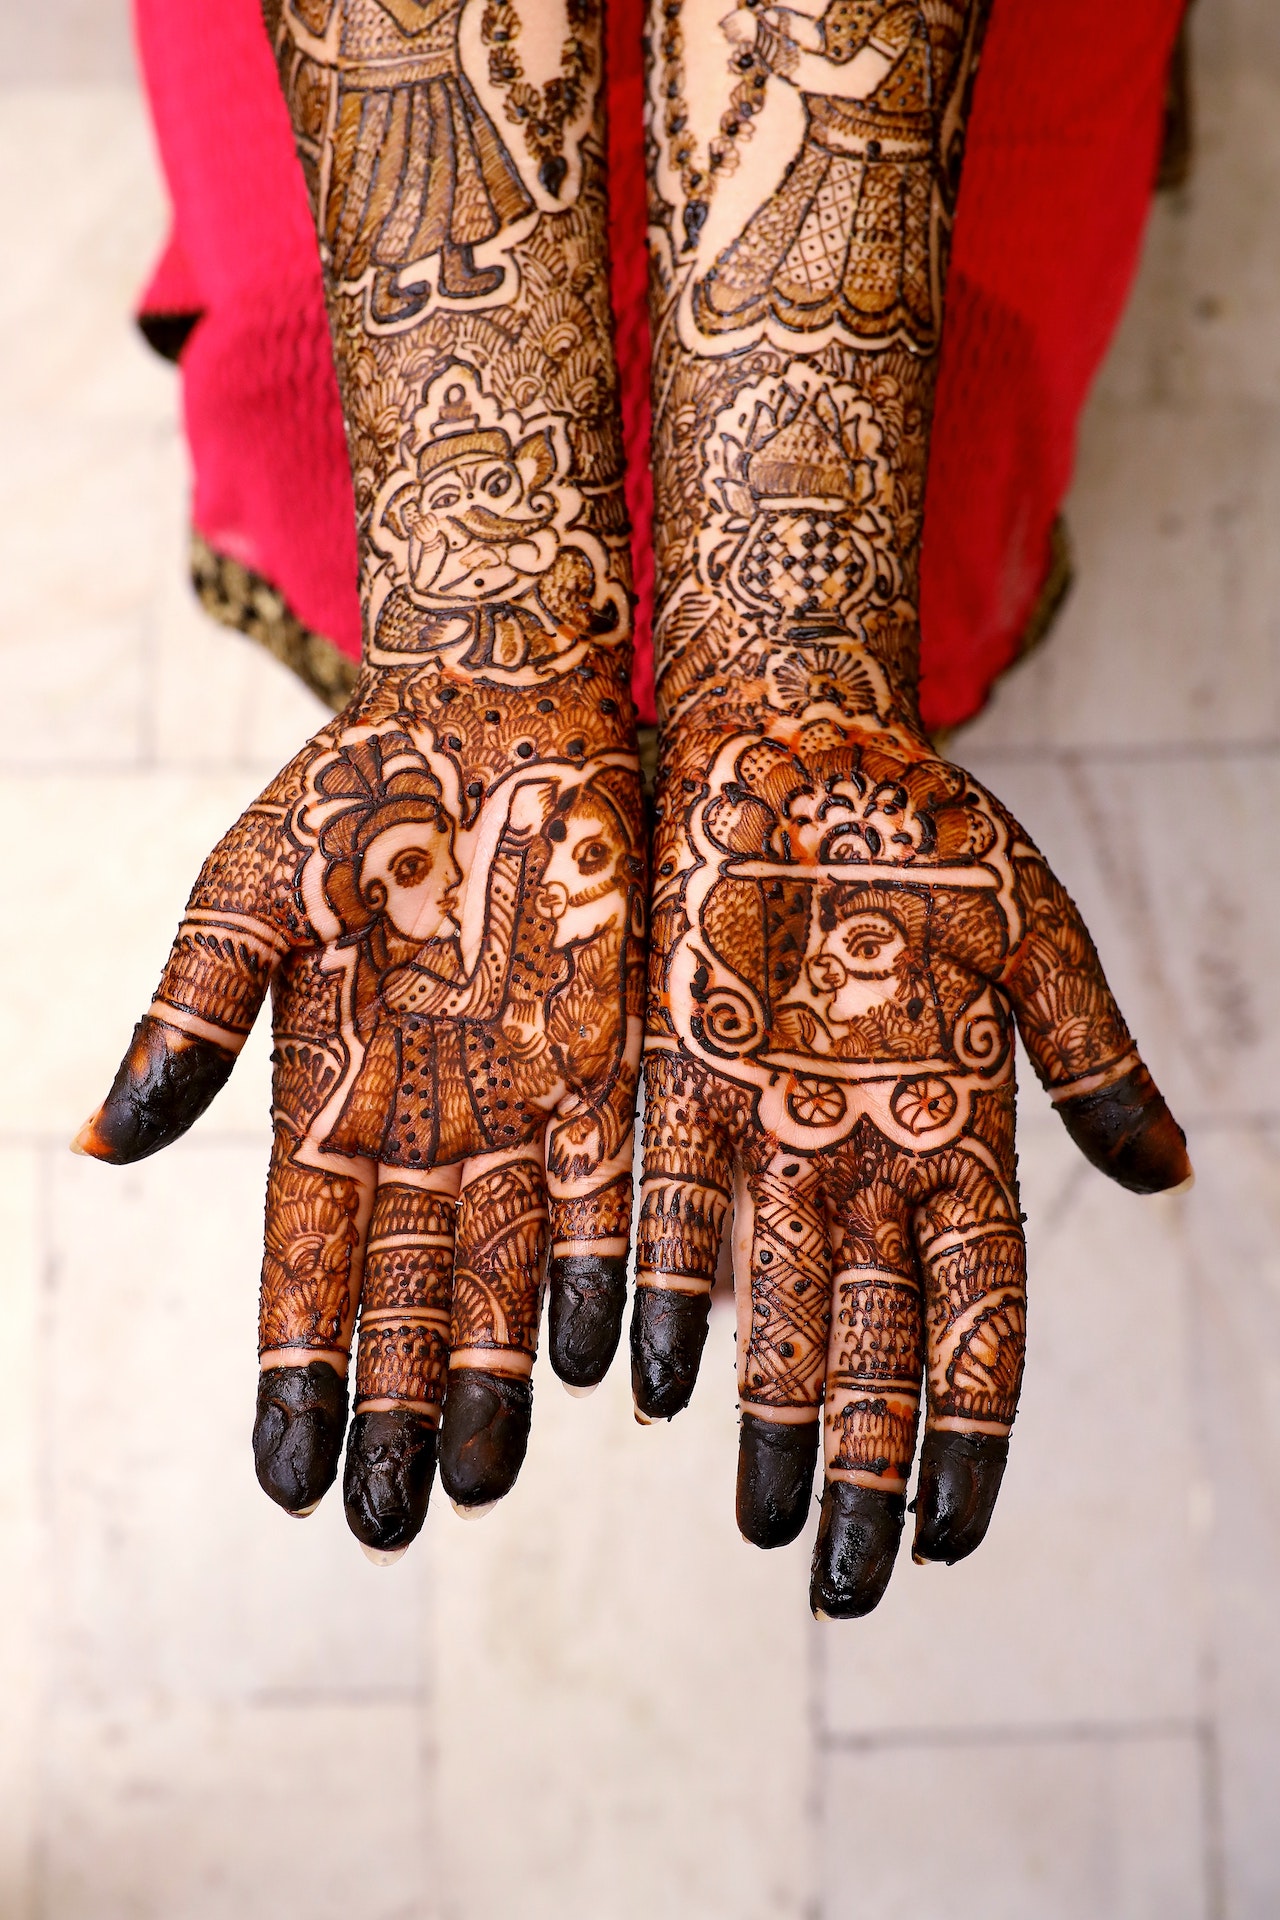 20 Mind-blowing Traditional Indian Wedding Rituals We Bet You Didn't Know